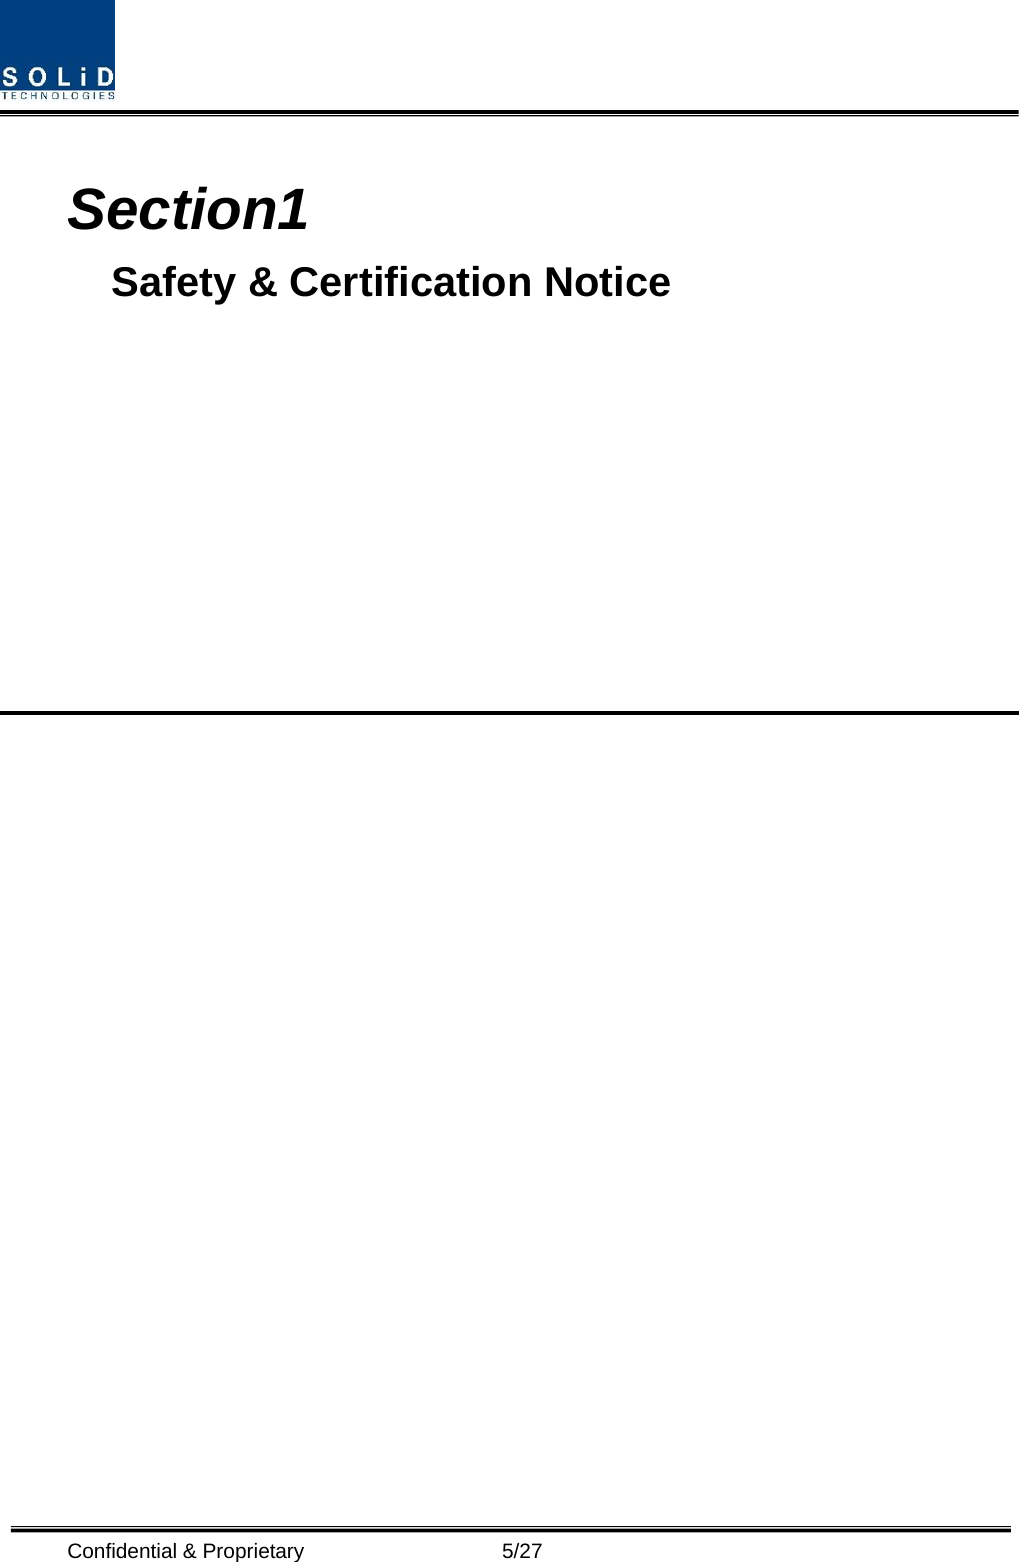  Confidential &amp; Proprietary                   5/27  Section1                                         Safety &amp; Certification Notice                                